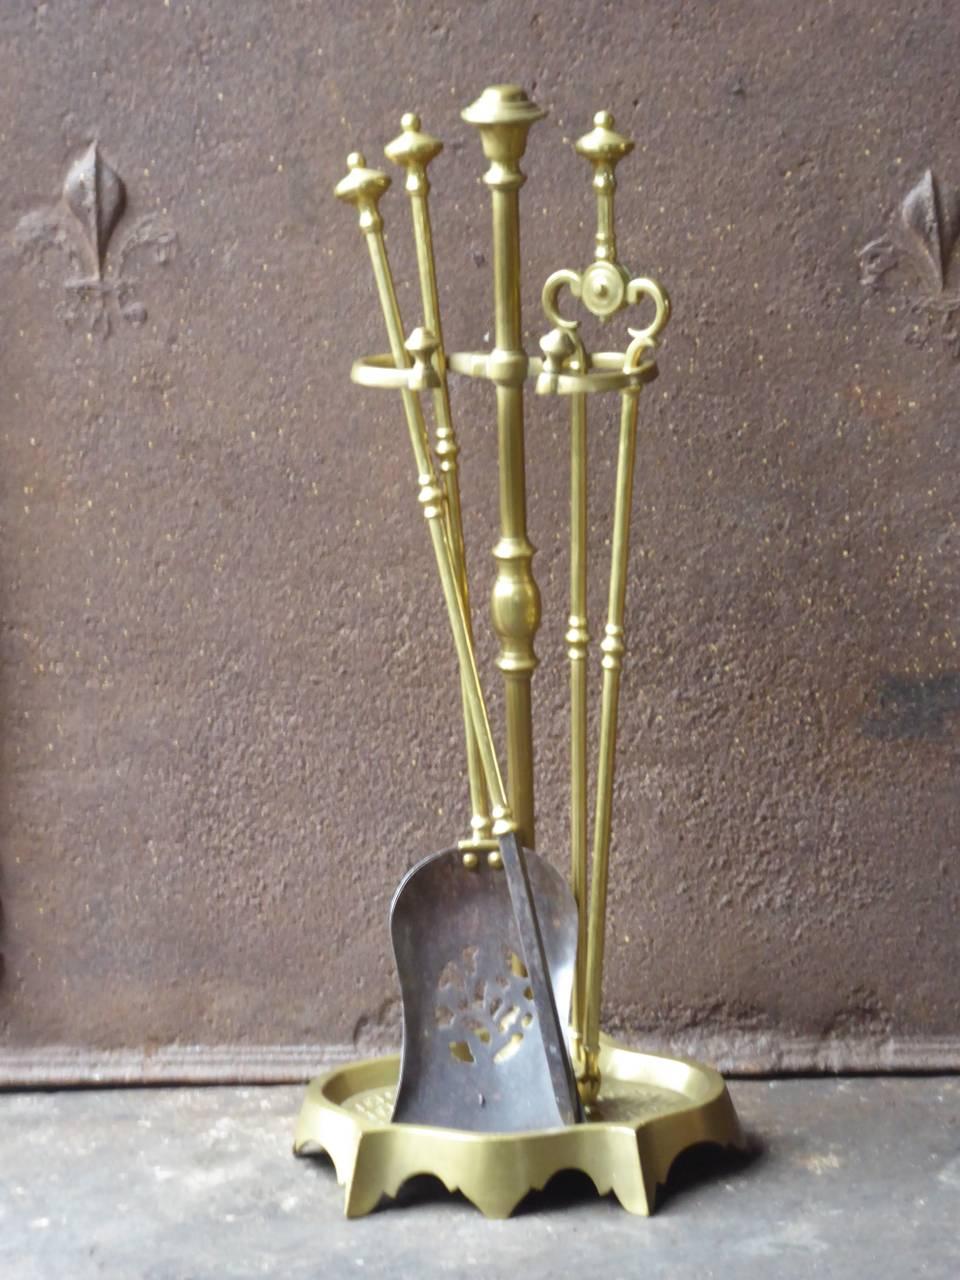 19th century English Victorian fireplace tool set, fire irons made of brass. The fireplace set is in a good condition and is fully functional.







 